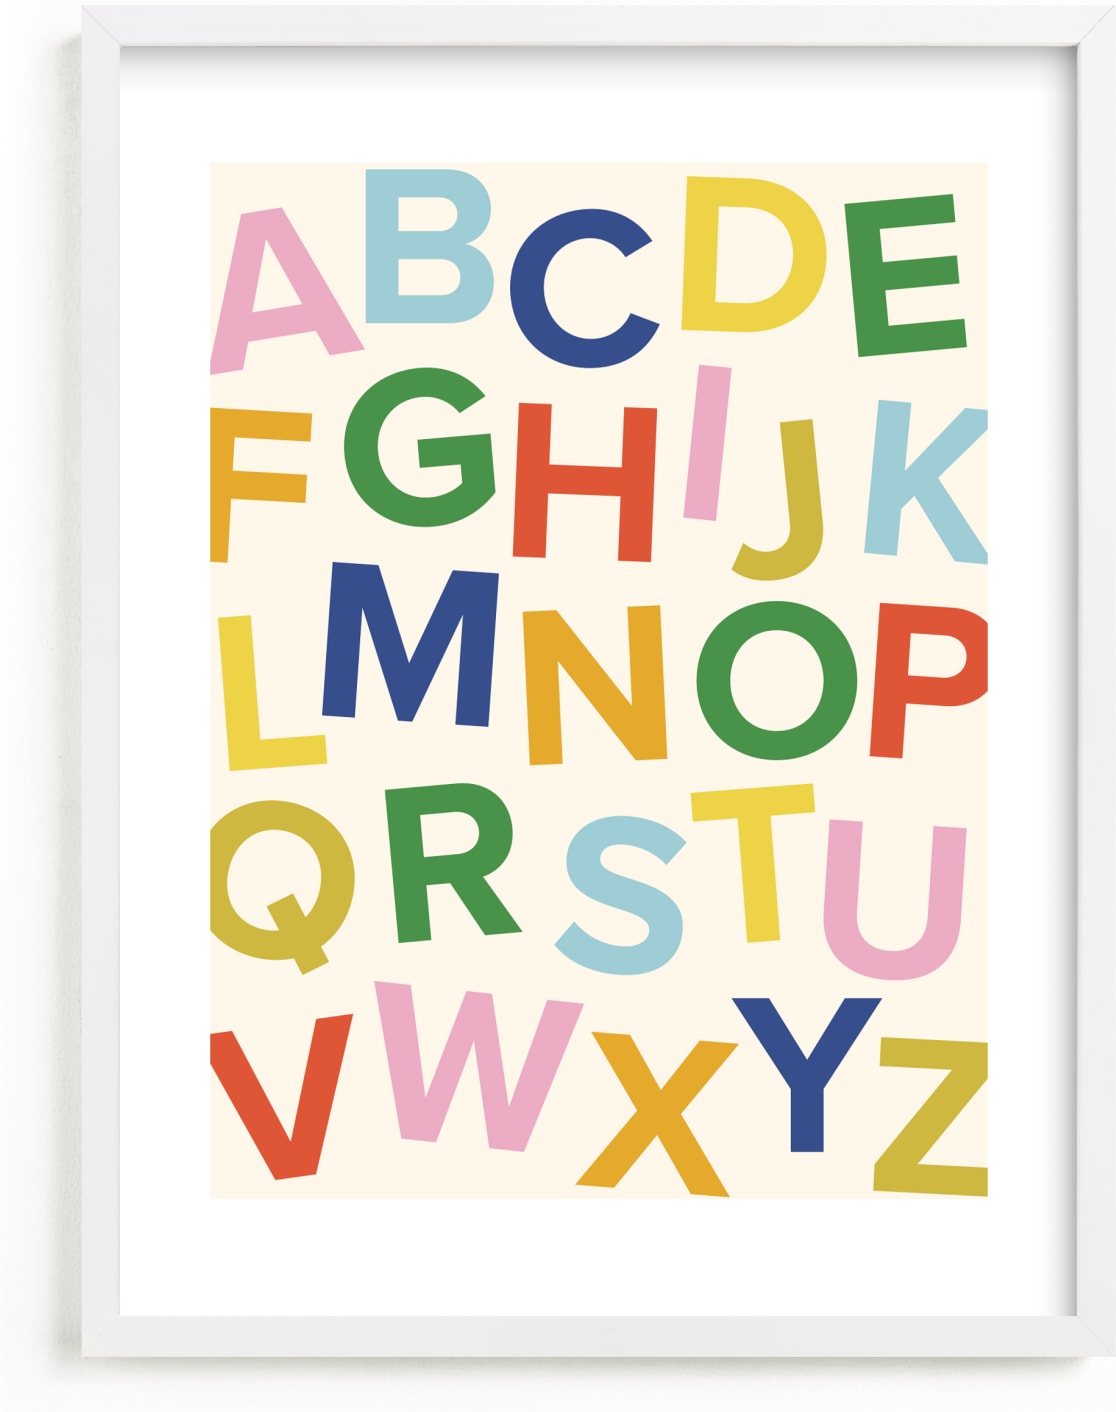 This is a colorful art by Ellen Schlegelmilch called happy alphabet.